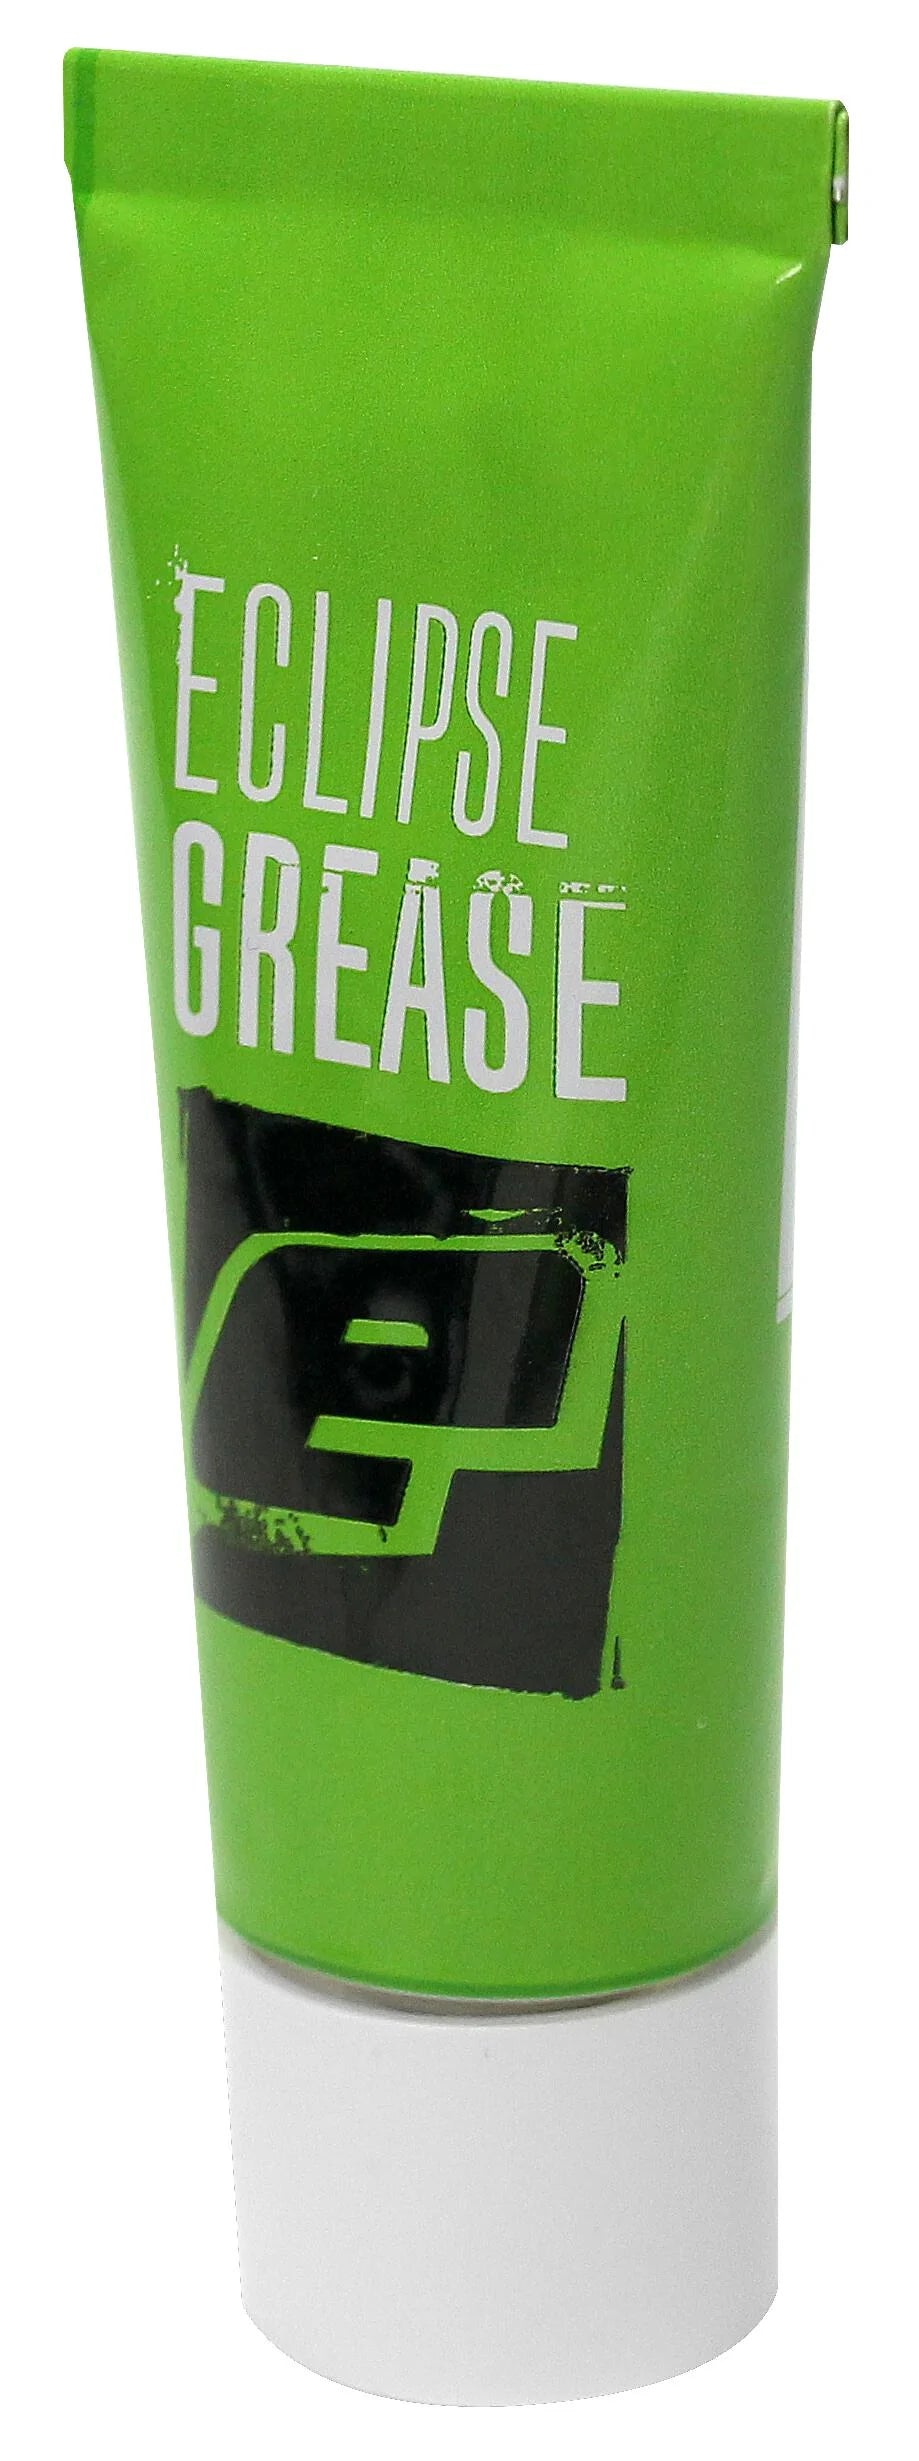 Eclipse Grease 20Ml Tube | Paintball Lubricant